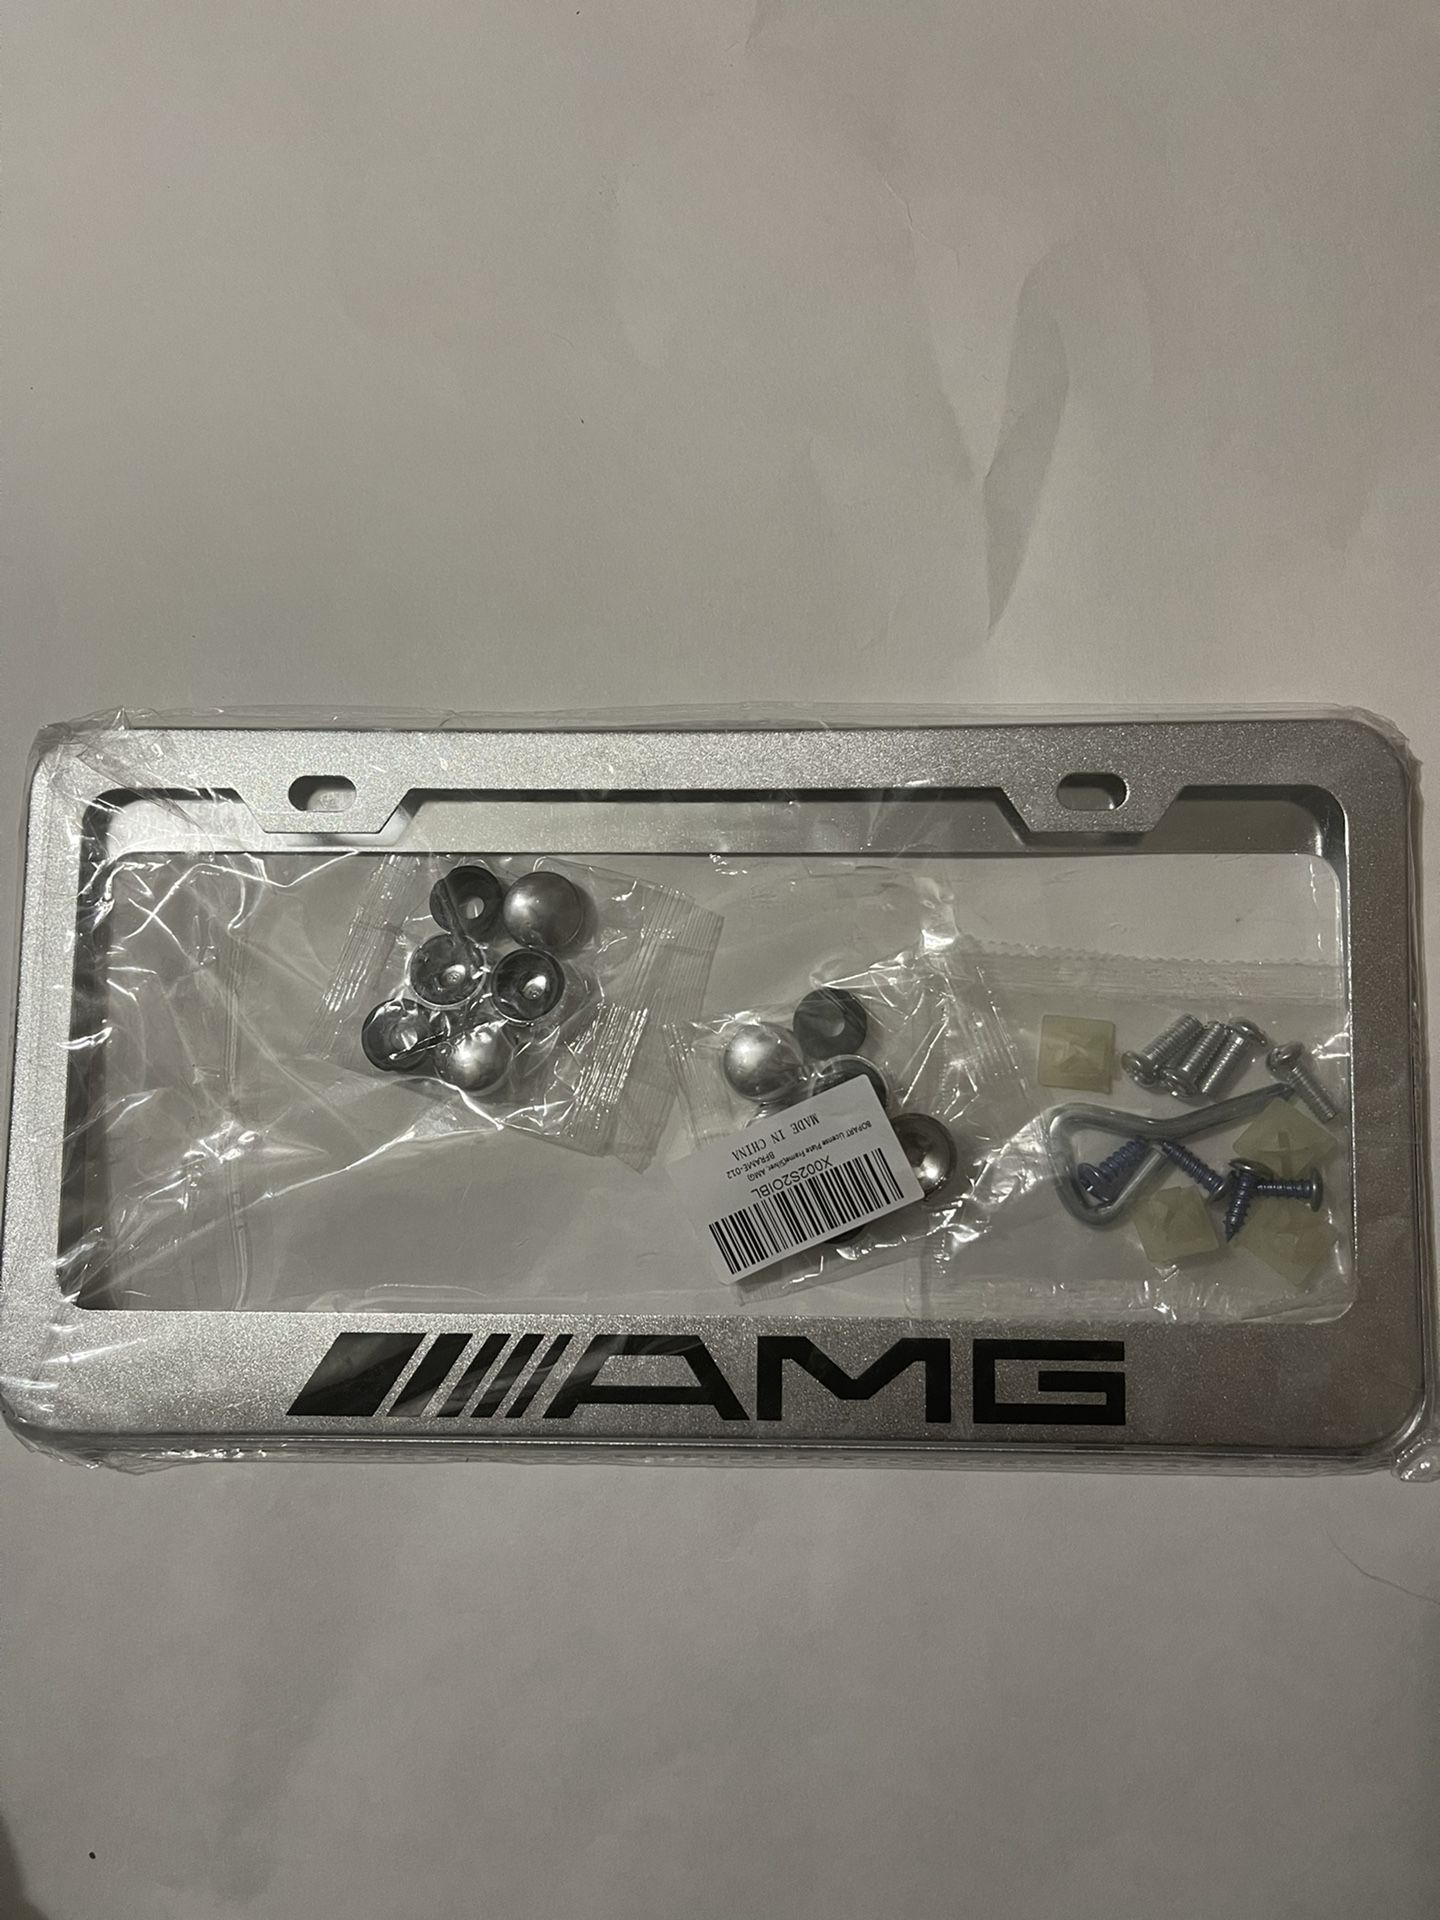 Mercedes Benz AMG Stainless Steel Chrome Finished License Plate Frame